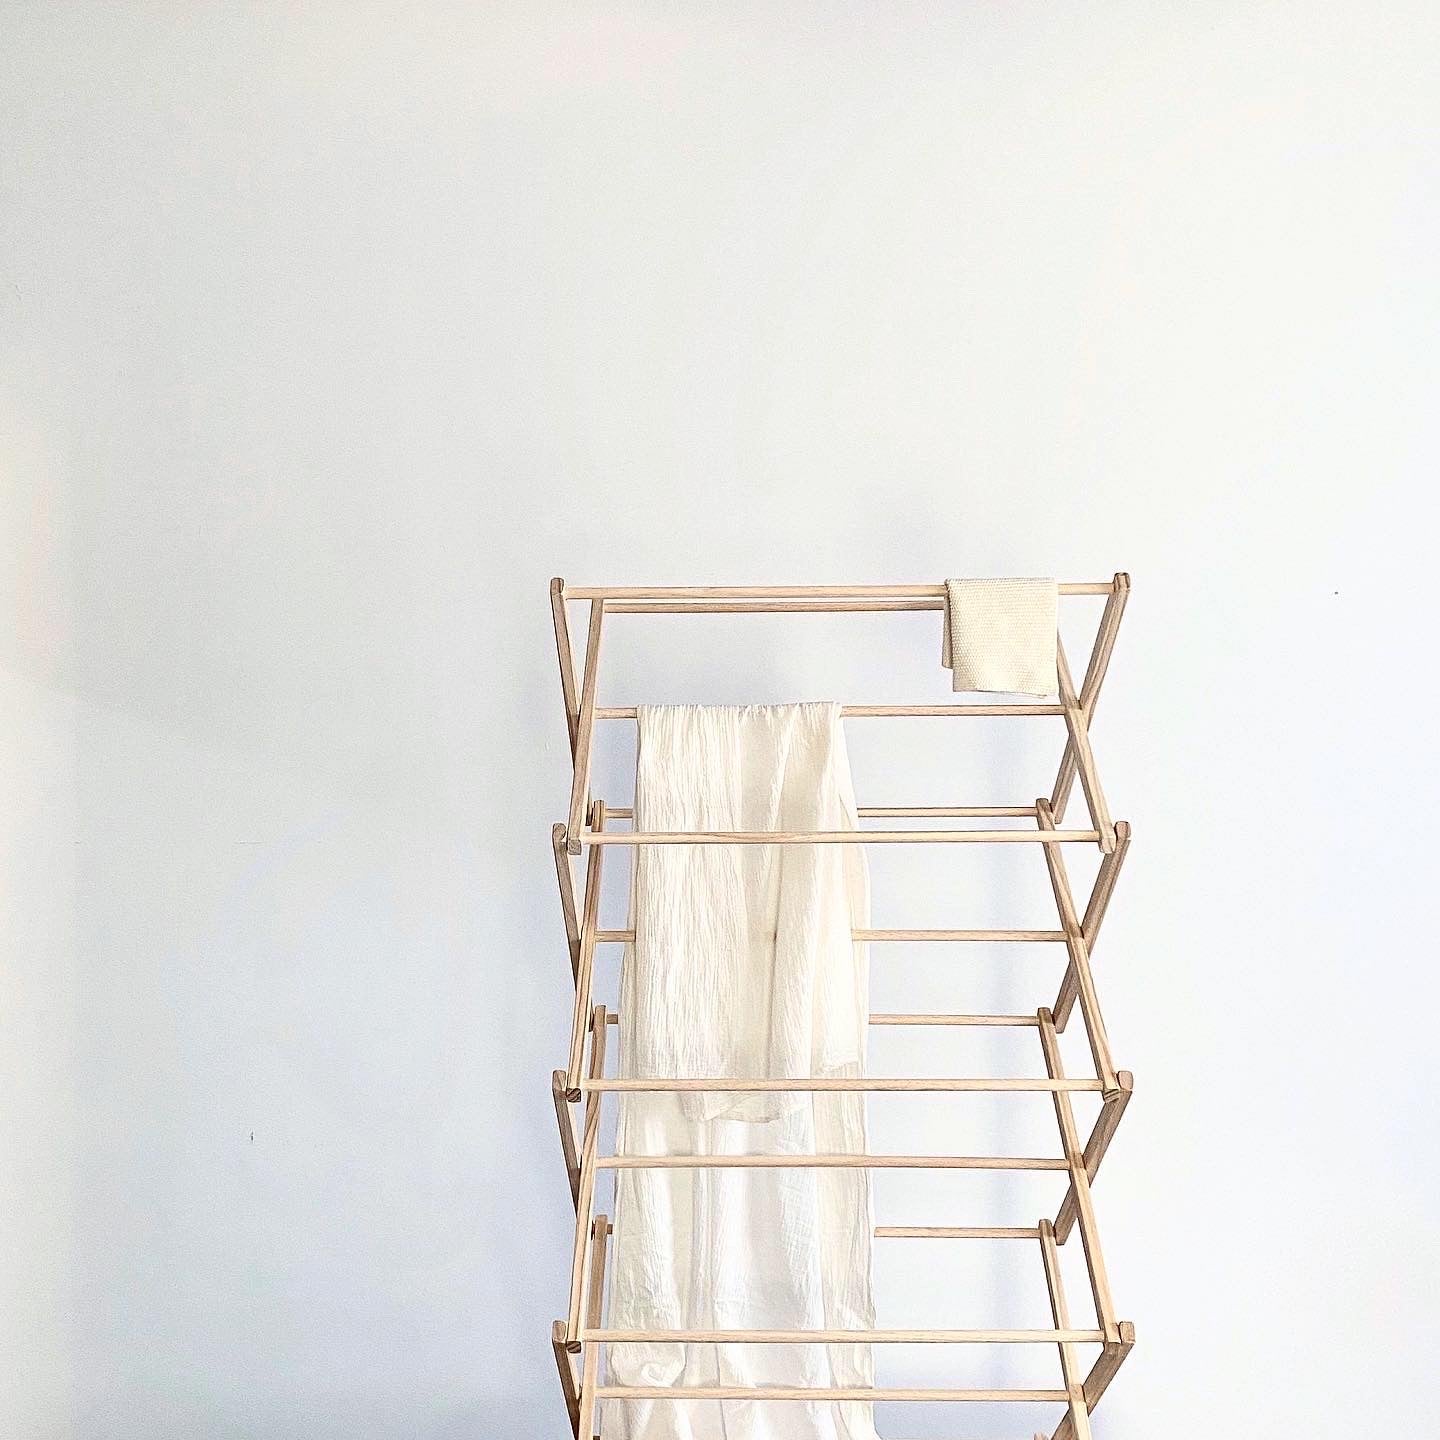 Folding Wooden Clothes Dryer + Top Rack